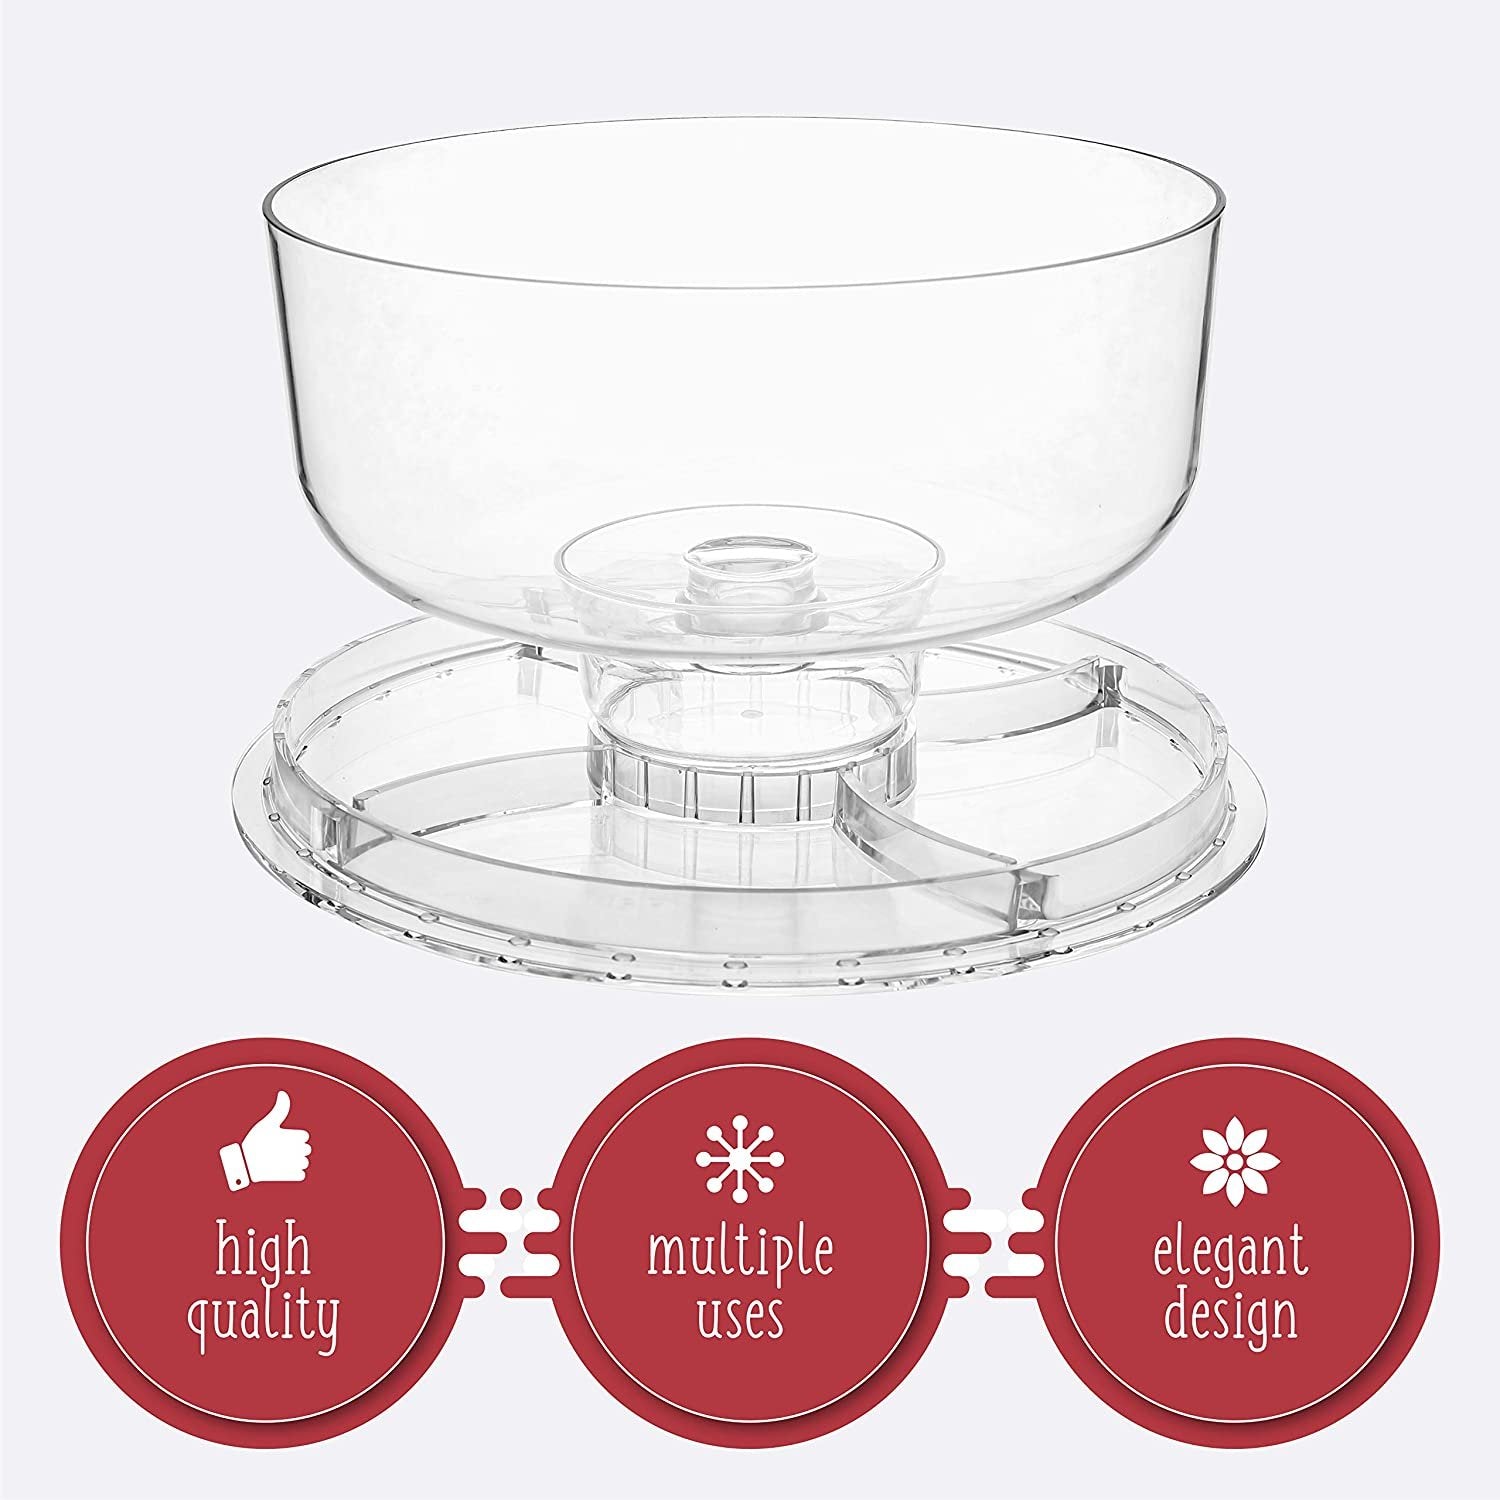 Acrylic Cake Stand with Dome Cover (12'') 6 in 1 Multi-Functional Serving Platter and Cake Plate - Use as Cake Holder, Salad Bowl, Platter, Punch Bowl, Desert Platter, Nachos & Salsa Plate,